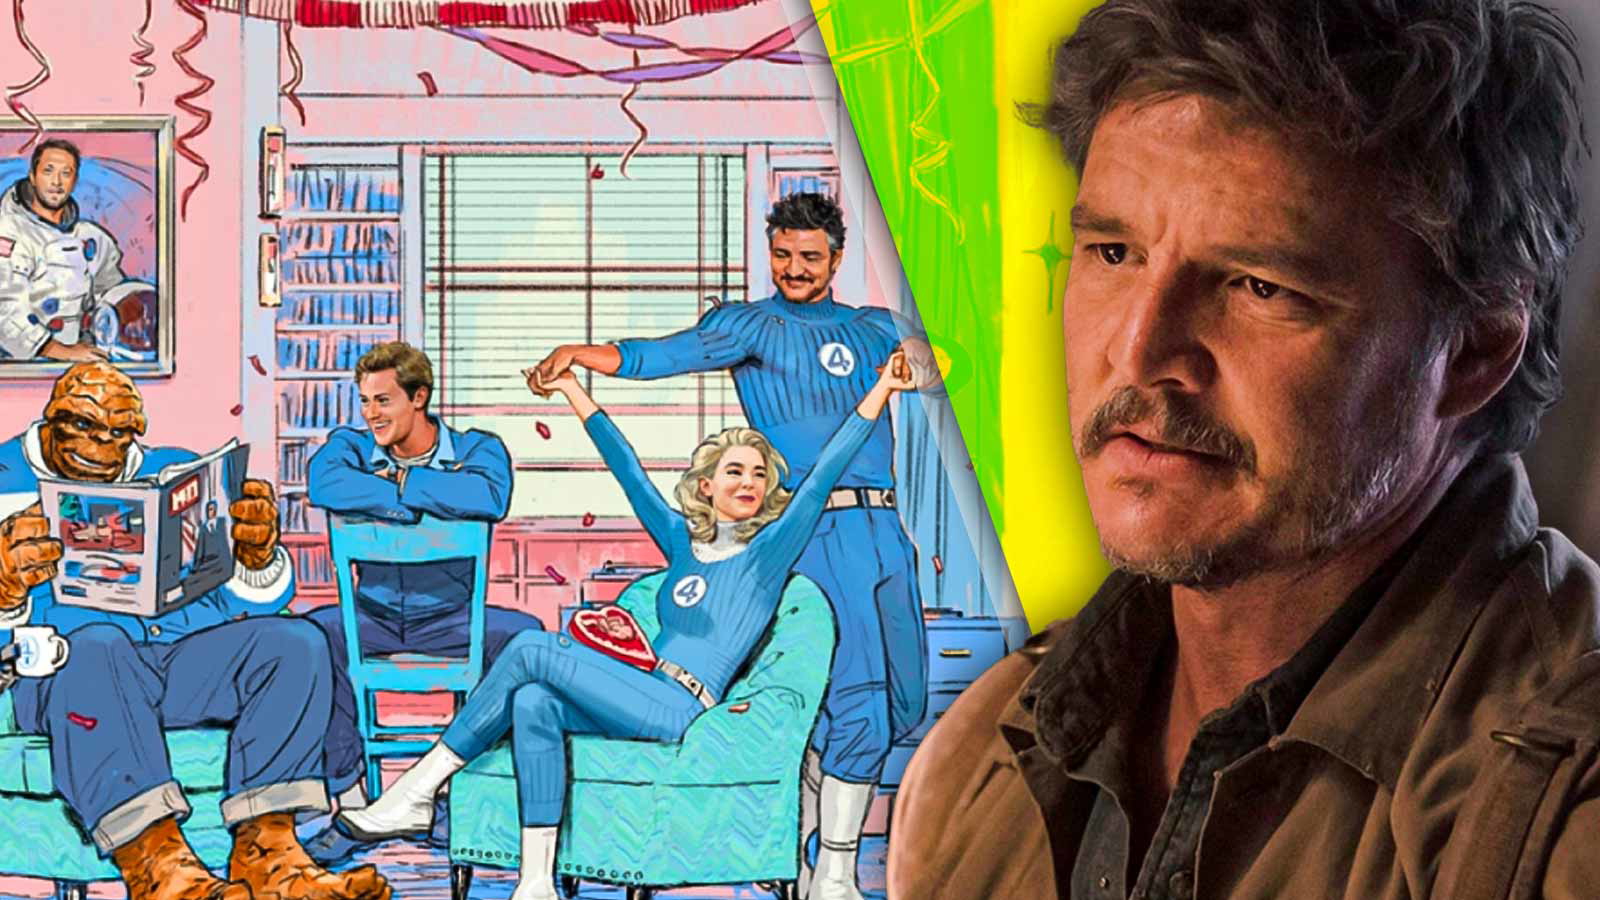 “He came and he saw the place…”: Pedro Pascal’s Fantastic Four Role is a Full Circle Moment After His Hilarious Experience With Director Matt Shakman 25 Years ago